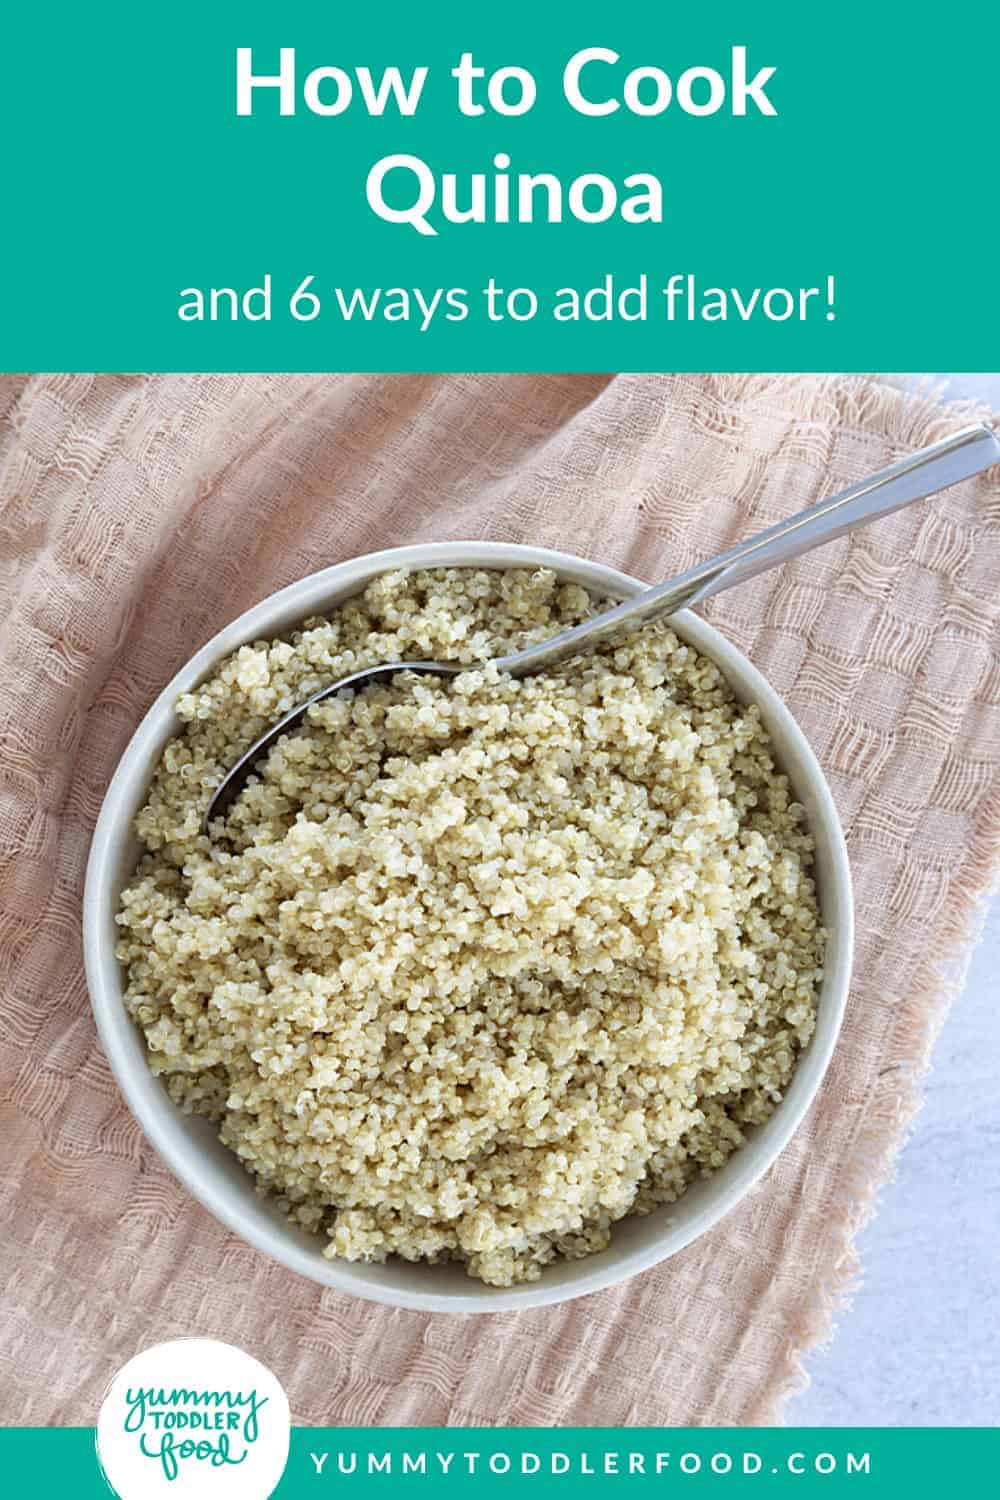 How to Cook Quinoa on the Stove, 6 Ways - Product4kids